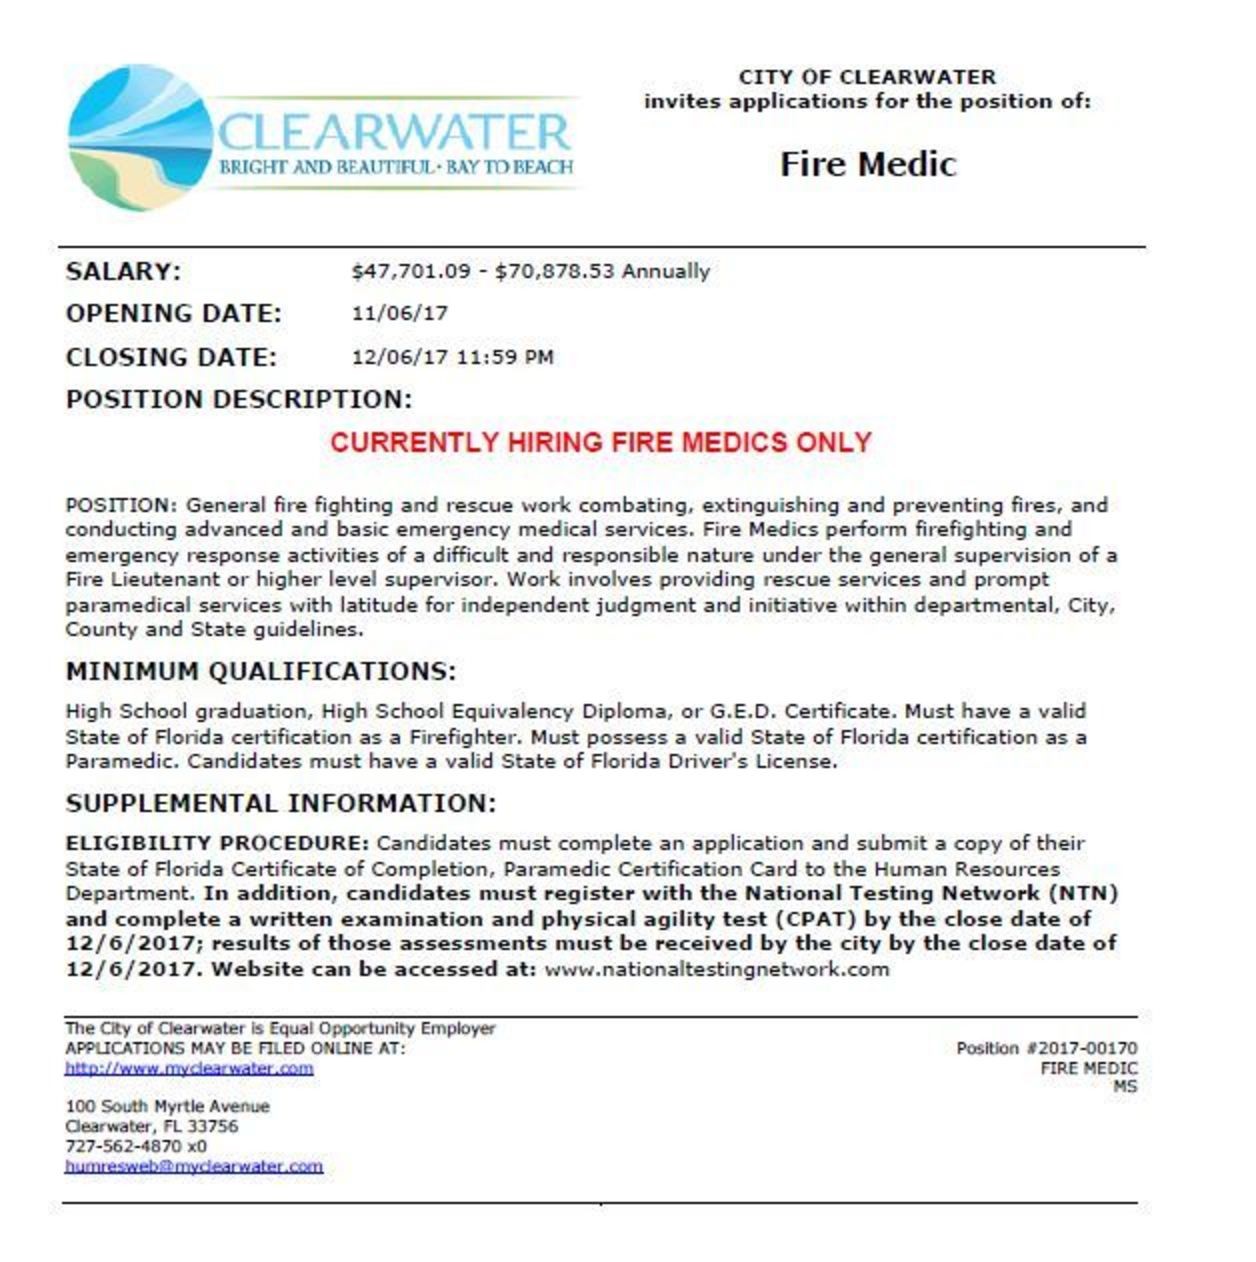 City of Clearwater Hiring Fire Medic